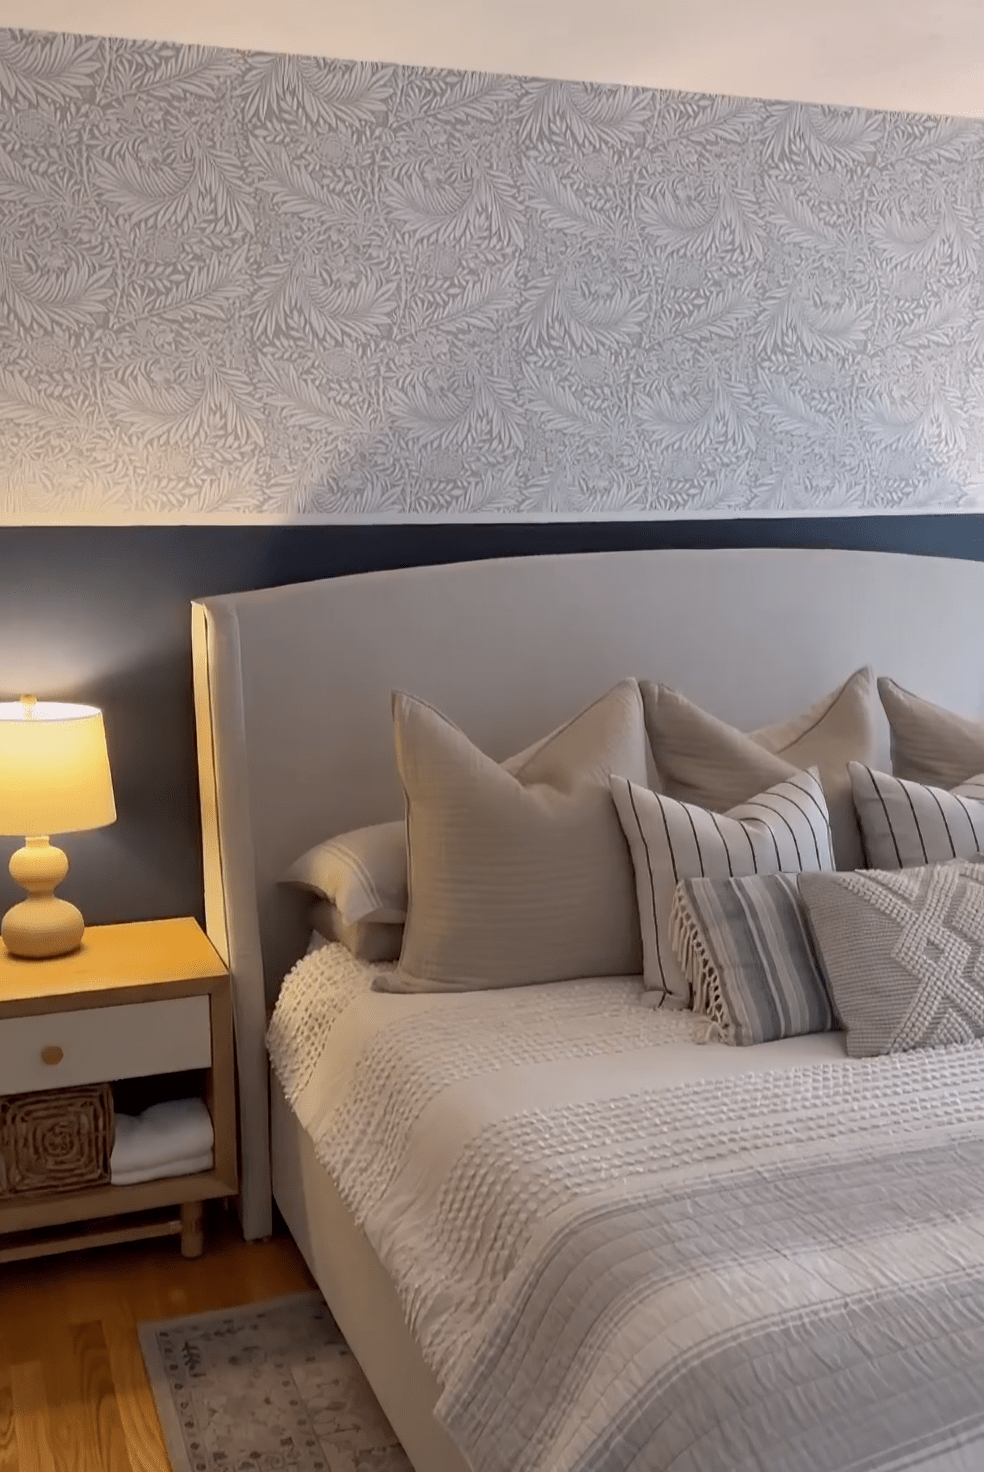 Cozy bedroom with whimsical grey and white leaf-patterned wallpaper, a neatly made bed with textured pillows, wooden nightstand, and ceramic table lamp.